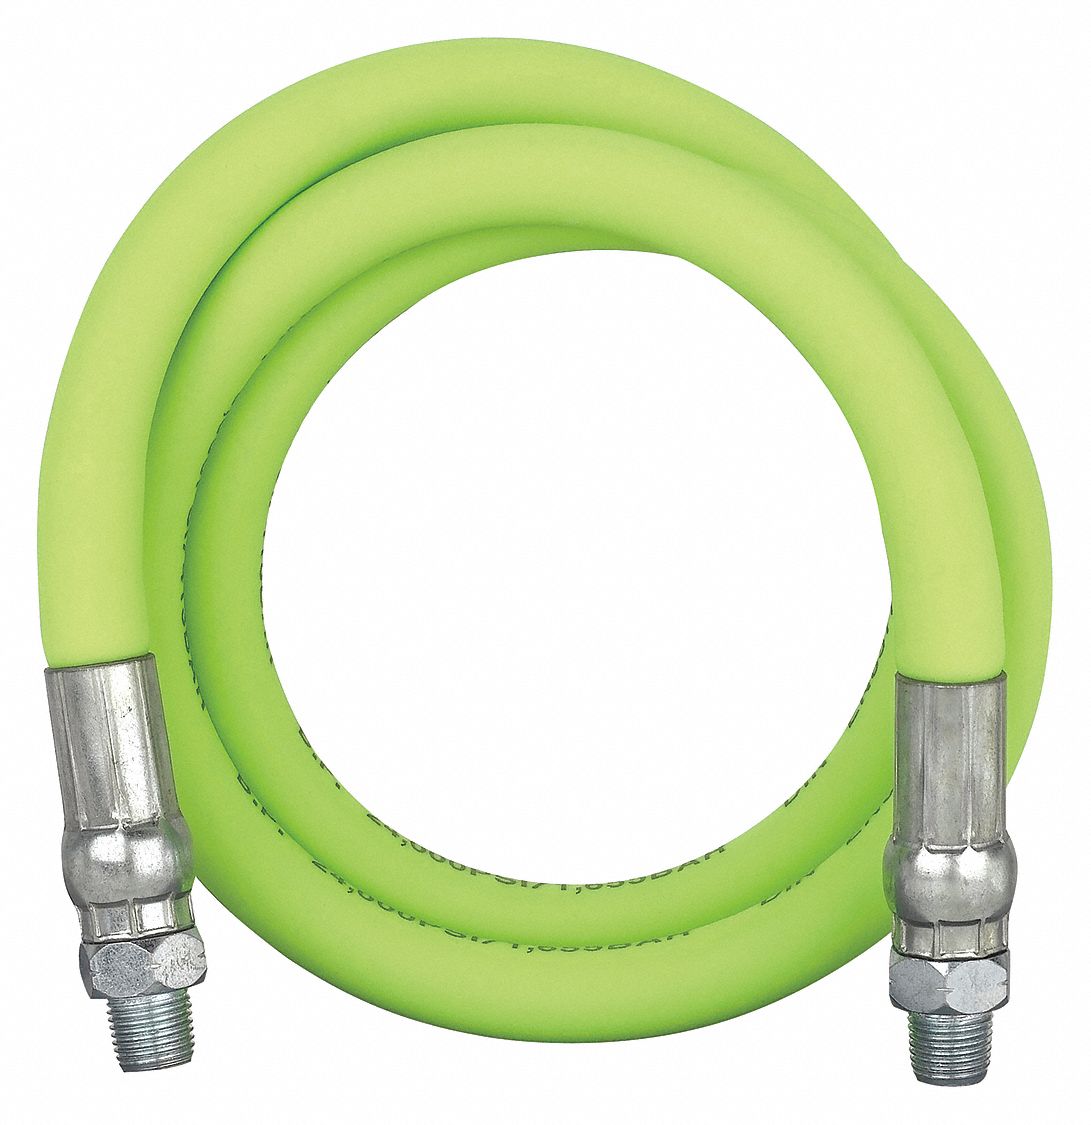 Grease Gun Hose: 36 in L, For Use With Manual or Battery Operated Grease Guns